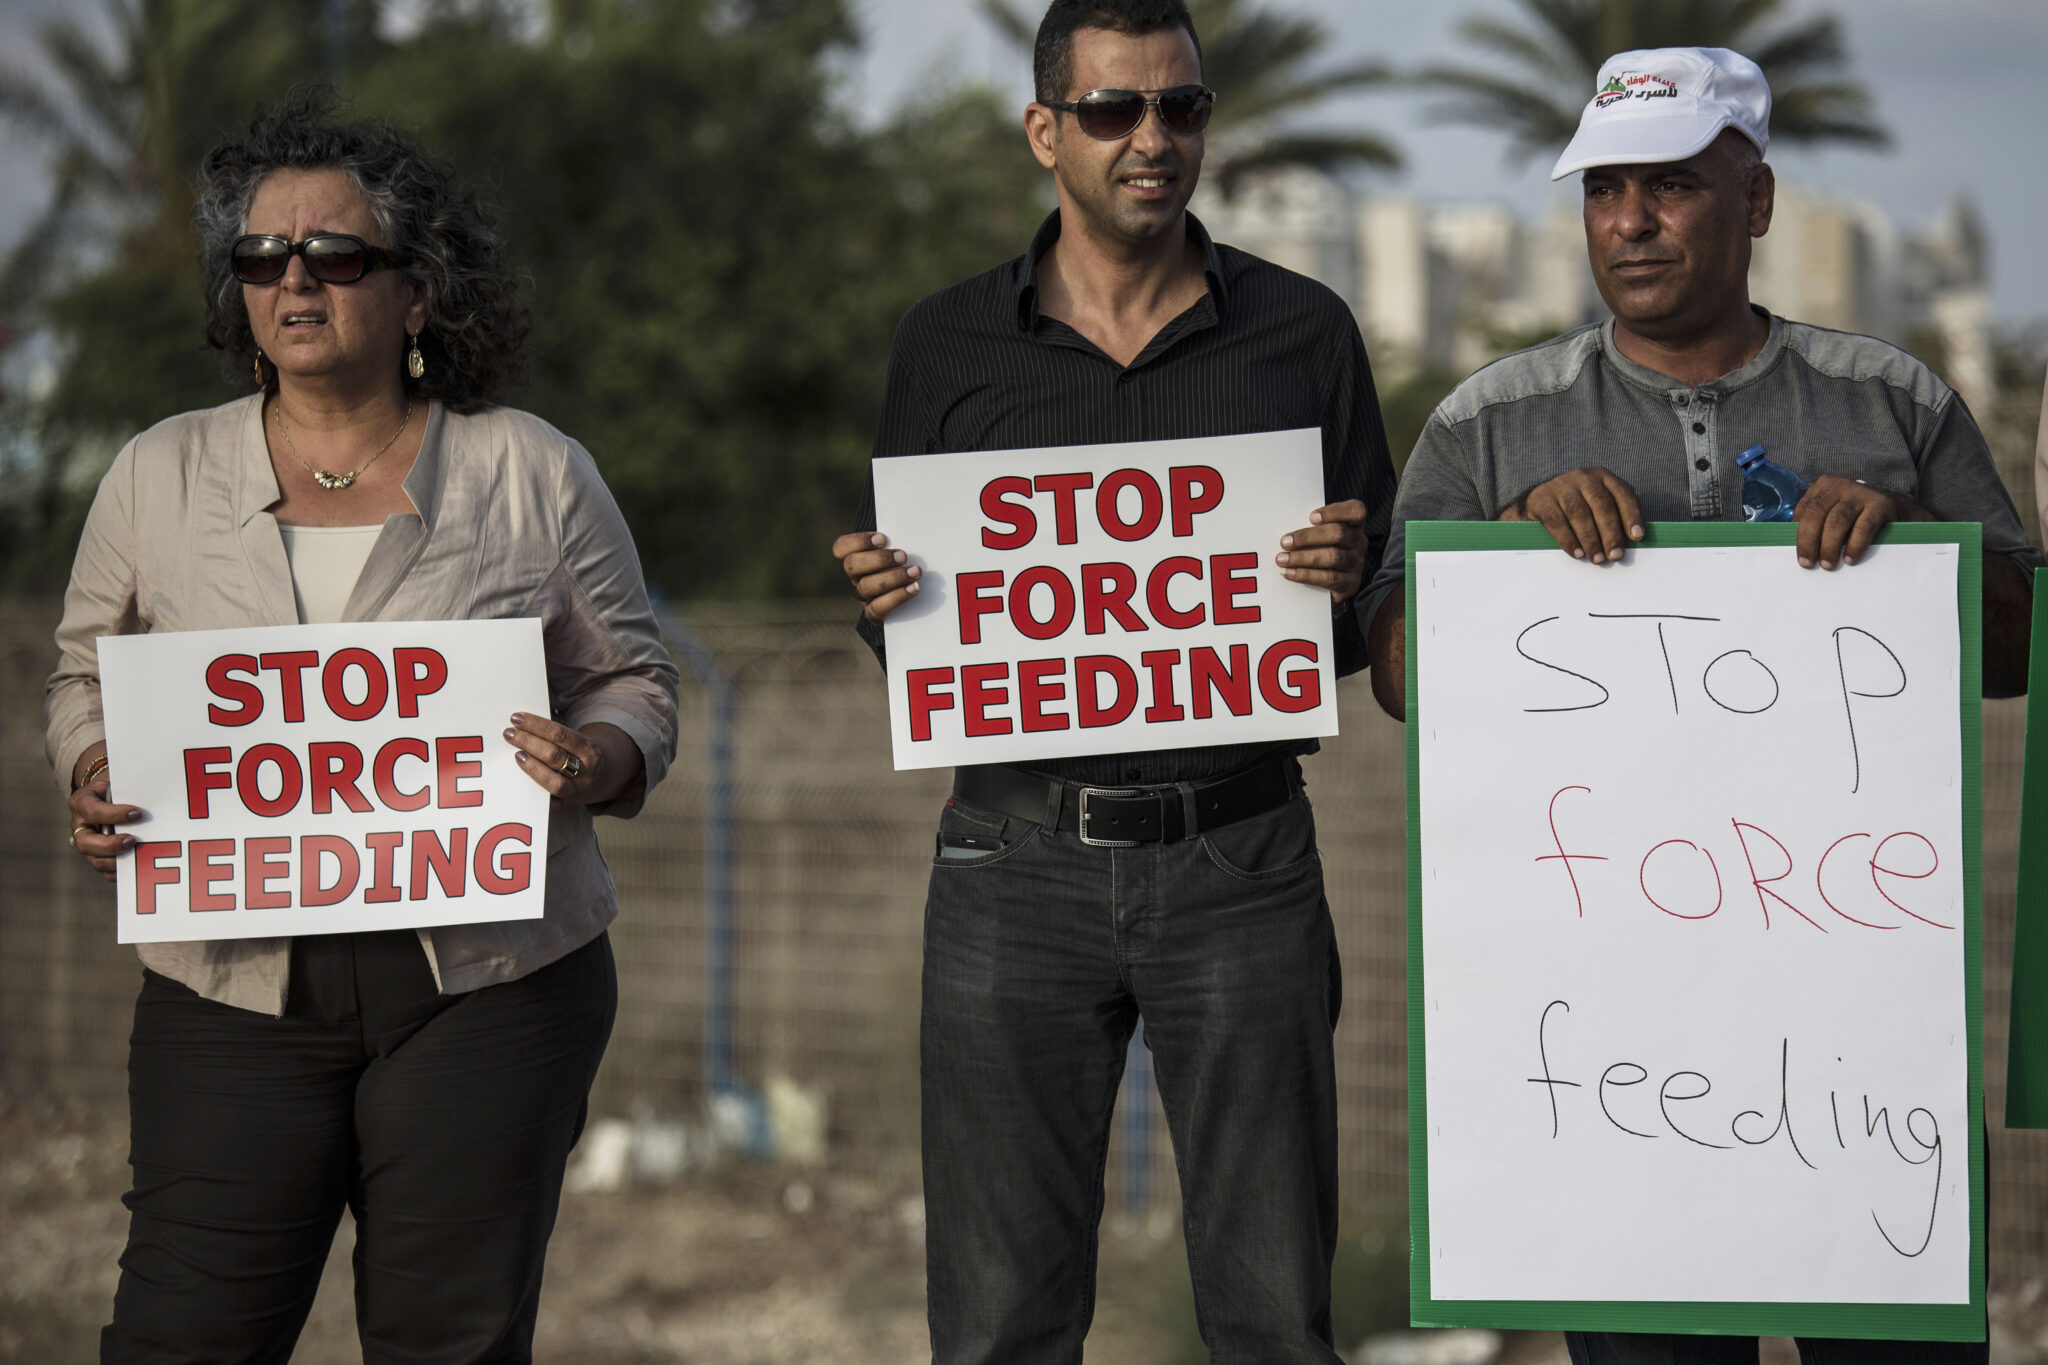 In this photo made on Tuesday, August 11, 2015, Israeli Arab supporters of Mohammed Allan, a Palestinian prisoner on a hunger strike, hold signs during a support rally outside Barzilai hospital, in the costal city of Ashkelon Israel. Israel passed a law to force feed hunger strikers by a slim margin in July and elicited harsh criticism. Critics call force-feeding an unethical violation of patient autonomy and akin to torture. The Israeli Medical Association, which has urged physicians not to cooperate, is challenging the law in the Supreme Court. (AP Photo/Tsafrir Abayov)